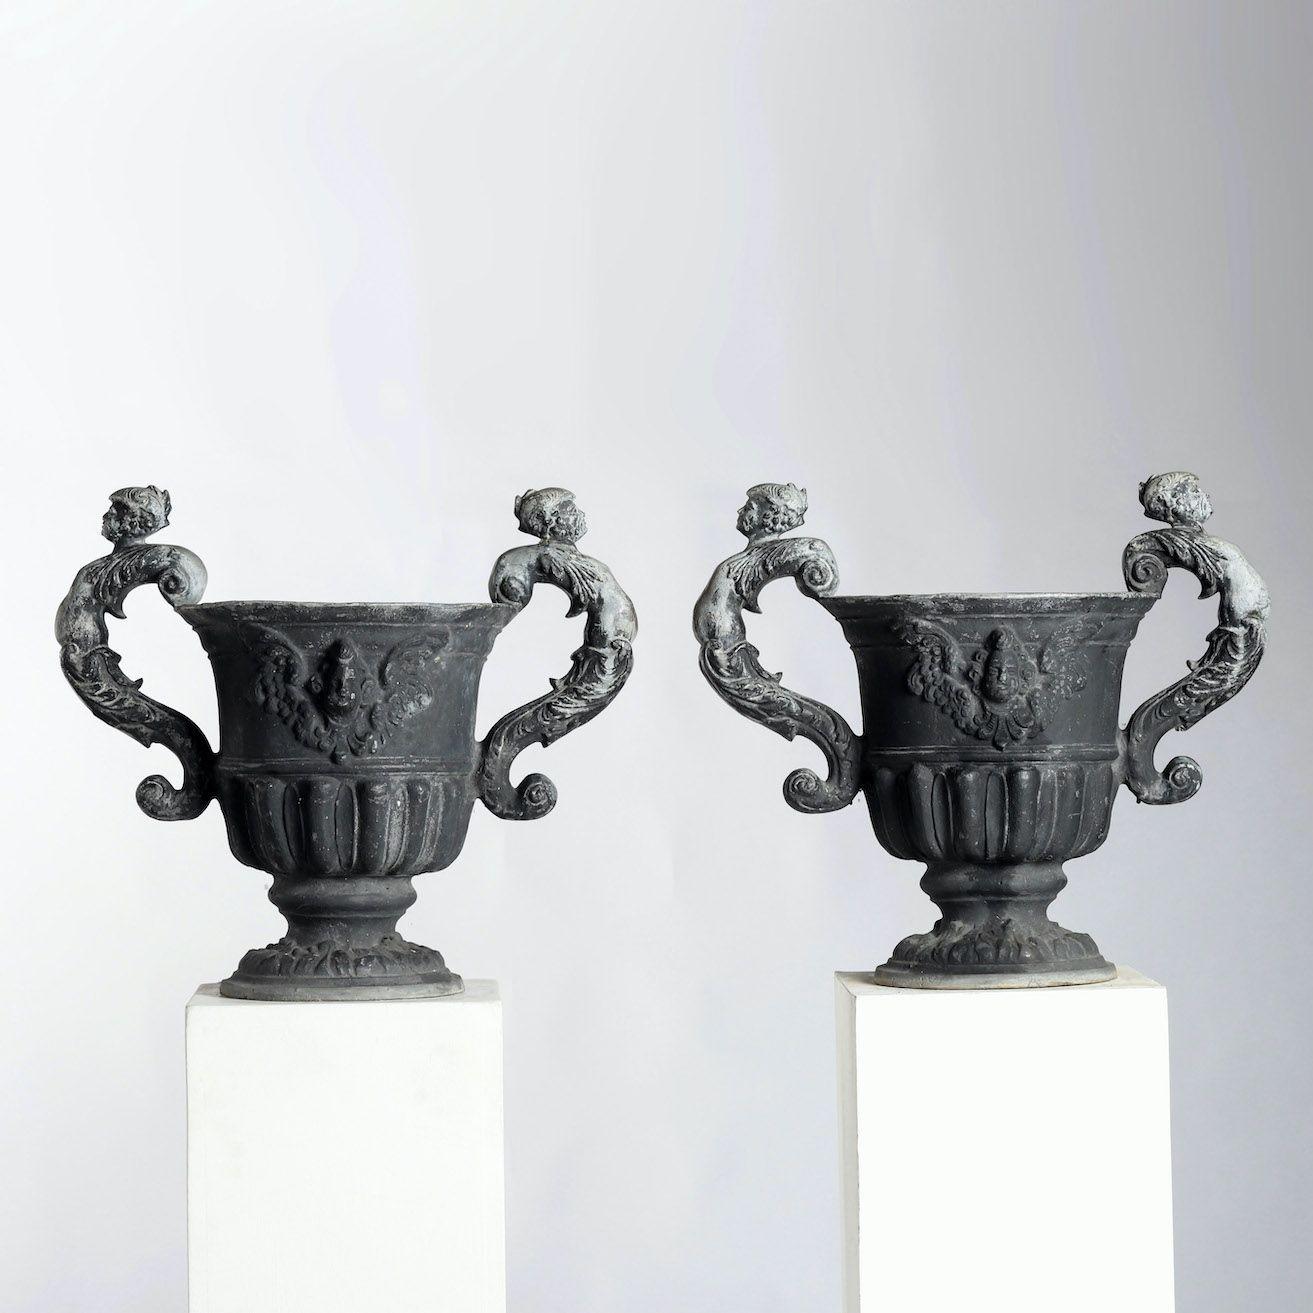 Exceptional pair of English lead urns. Round, with a gadrooned waist, the sculpted lead depicts a winged cherub with scrolling handles terminating in female nudes that resemble mermaids. Circa 1960.